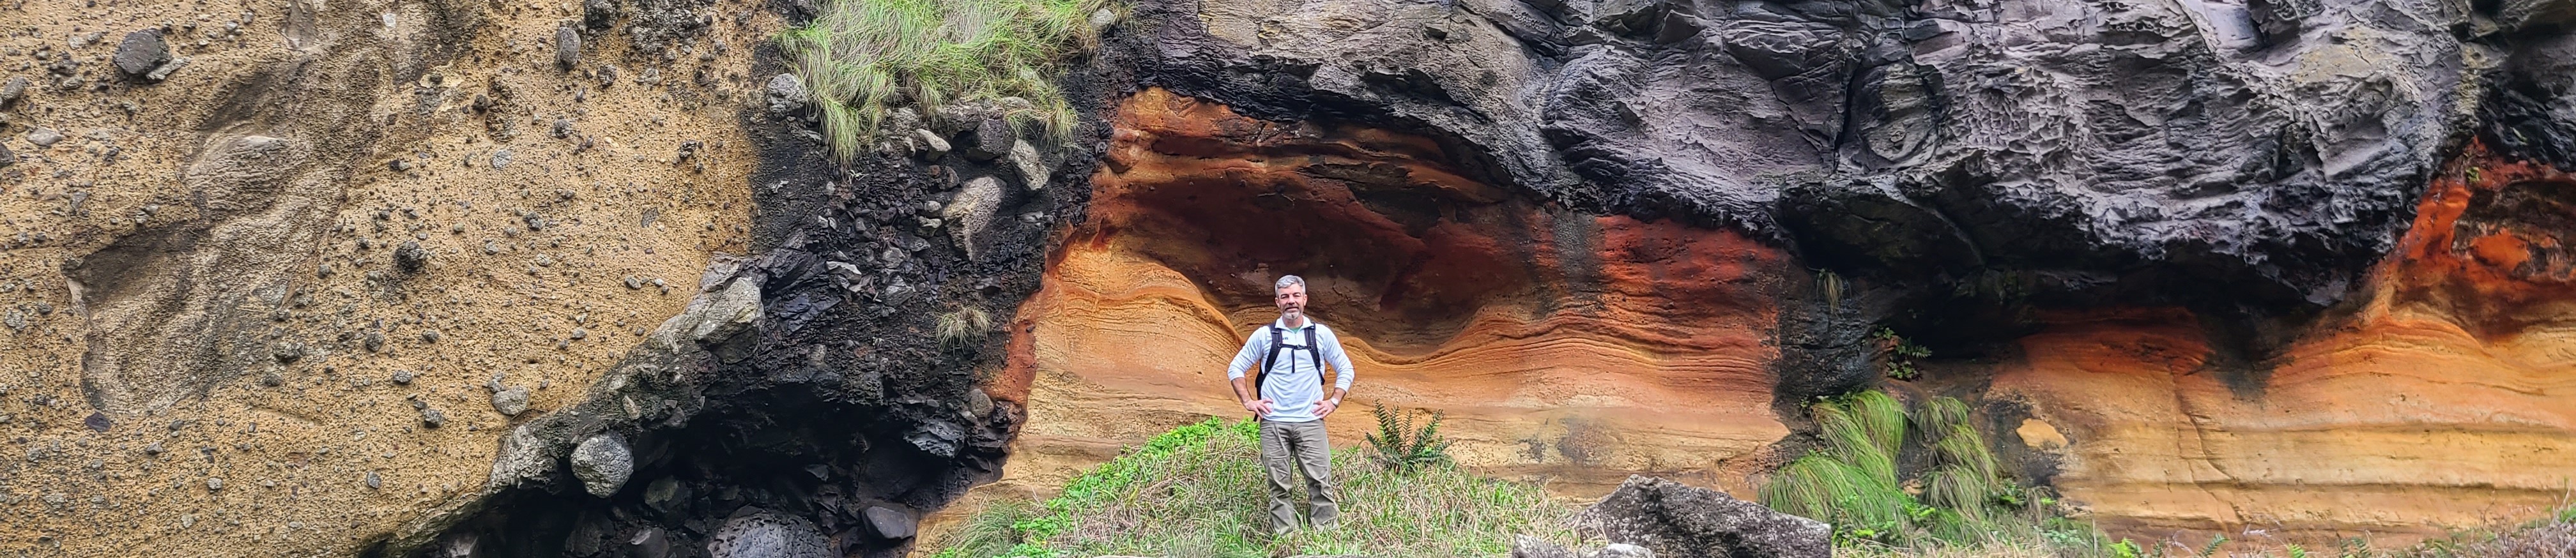 Volcanic units in Sao Miguel, Azores